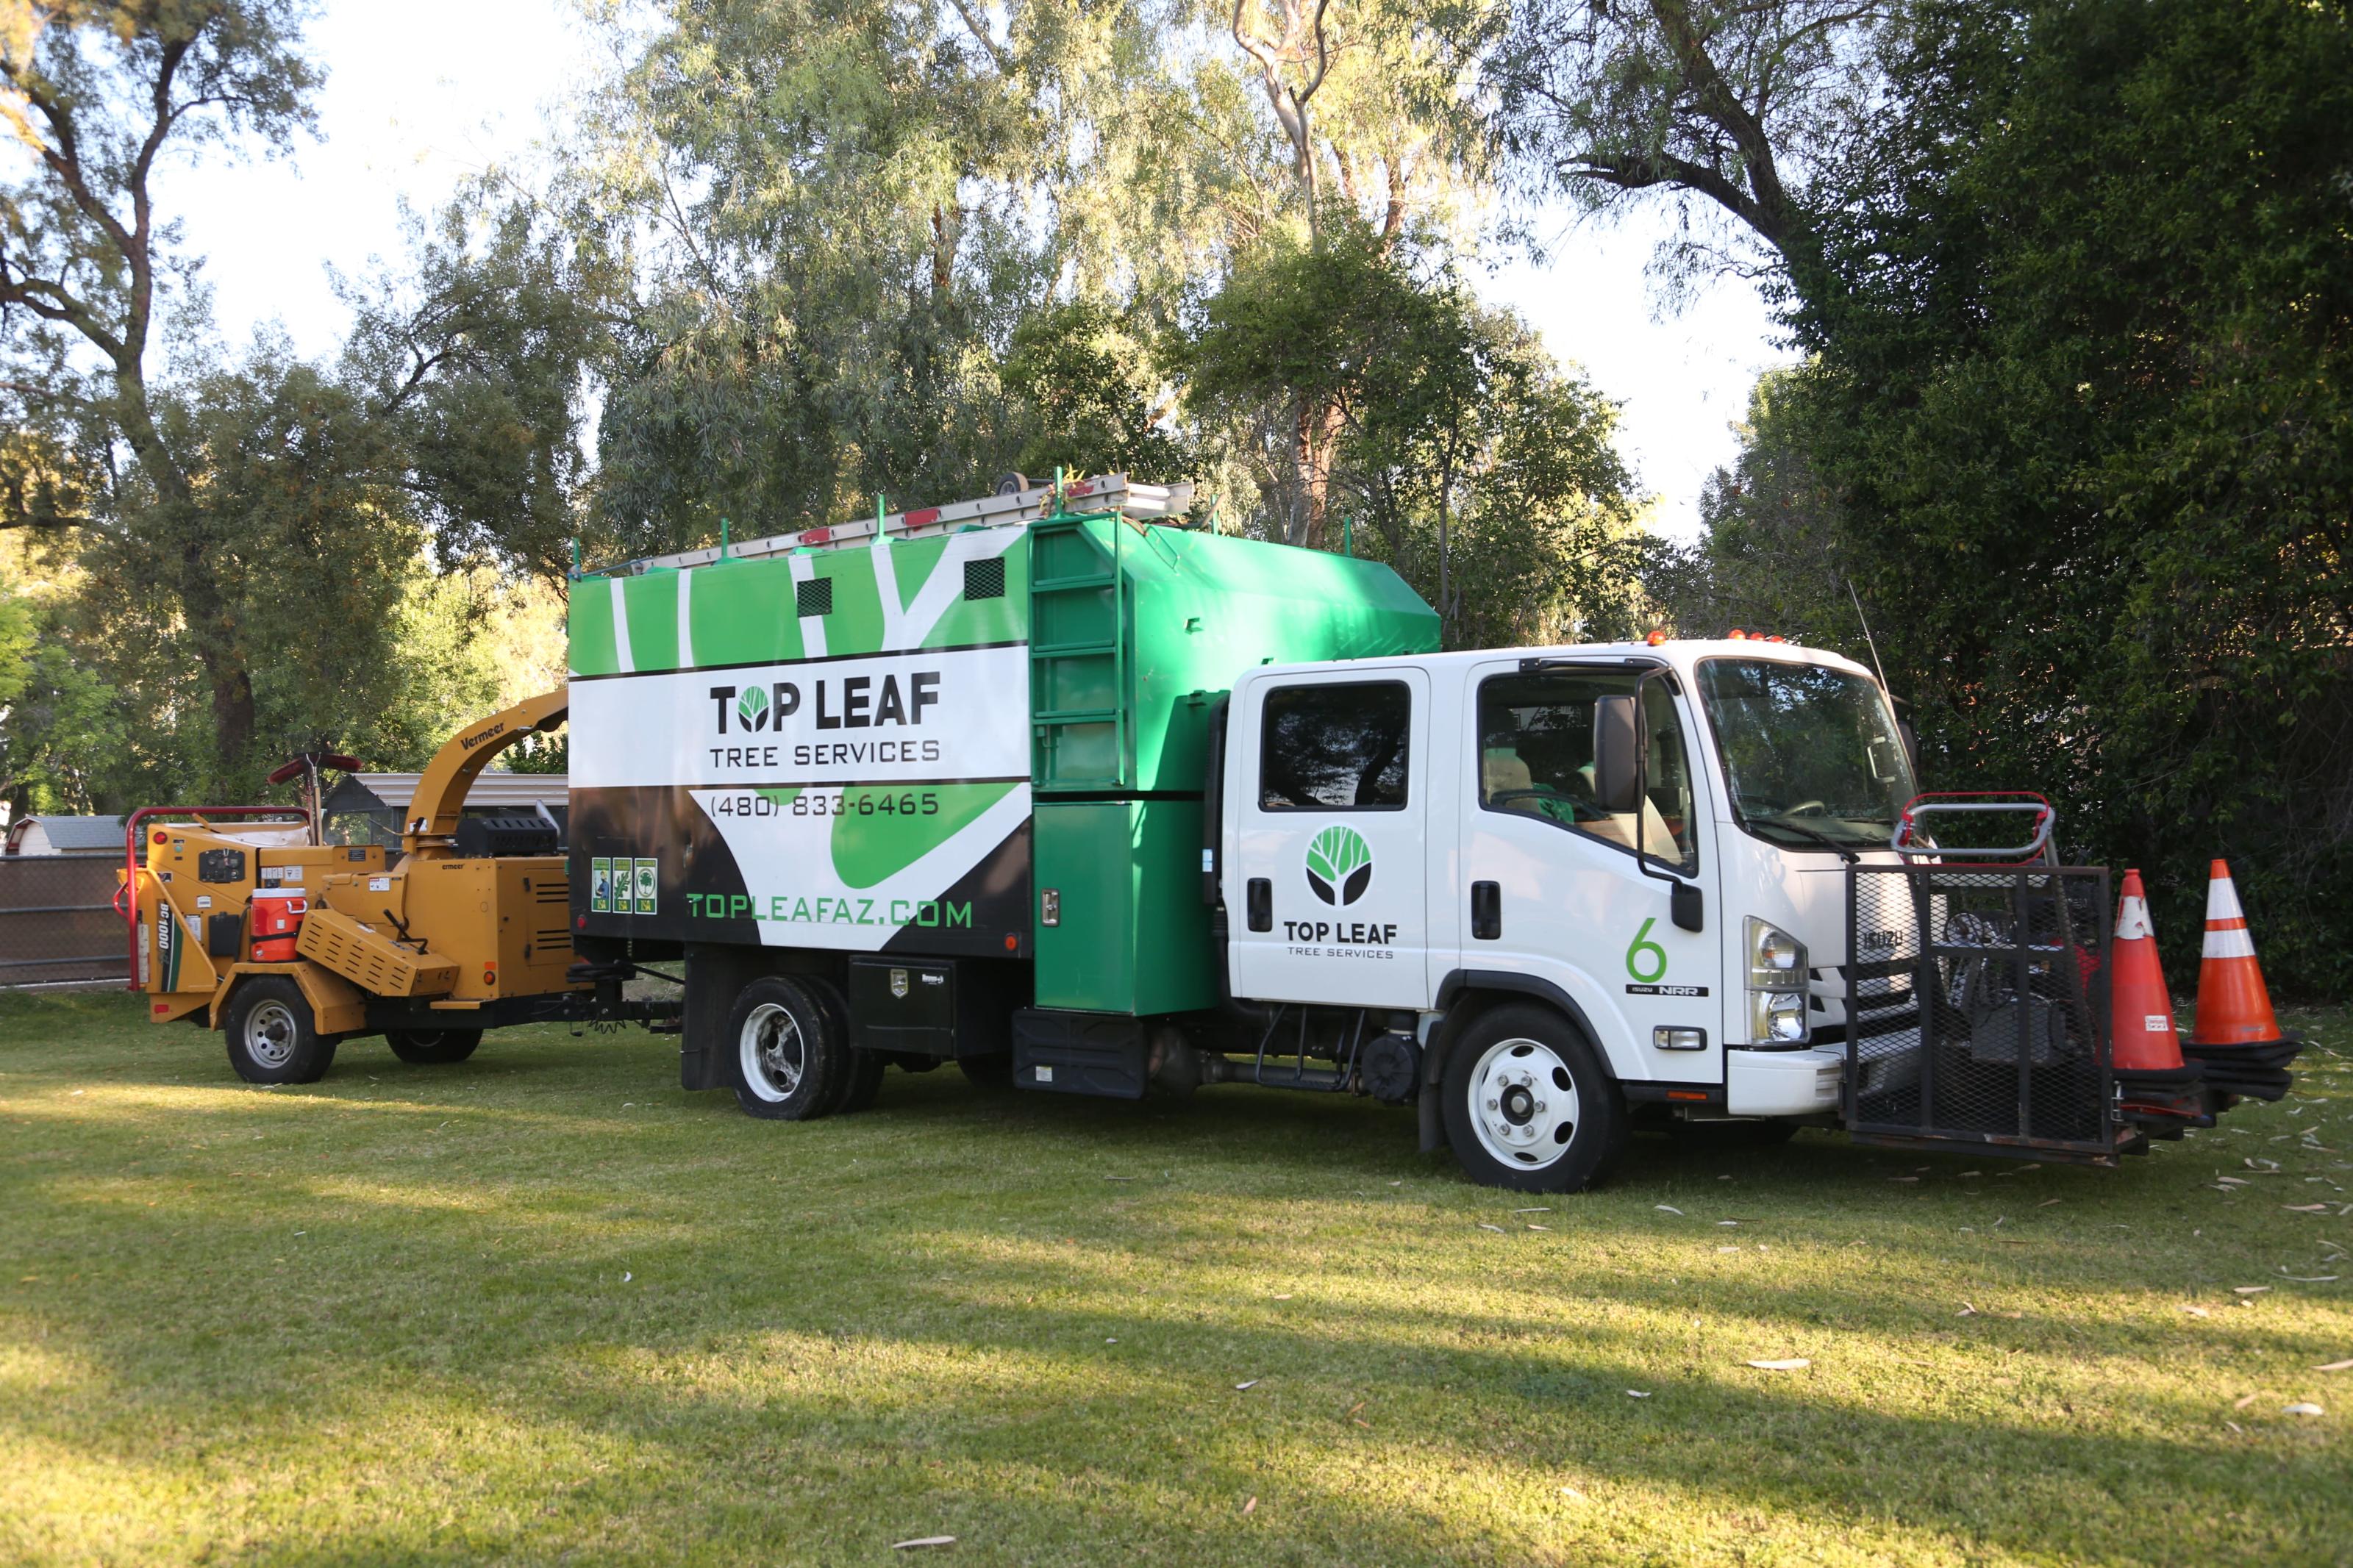 Get the Best Tree Fertilization With Top Leaf